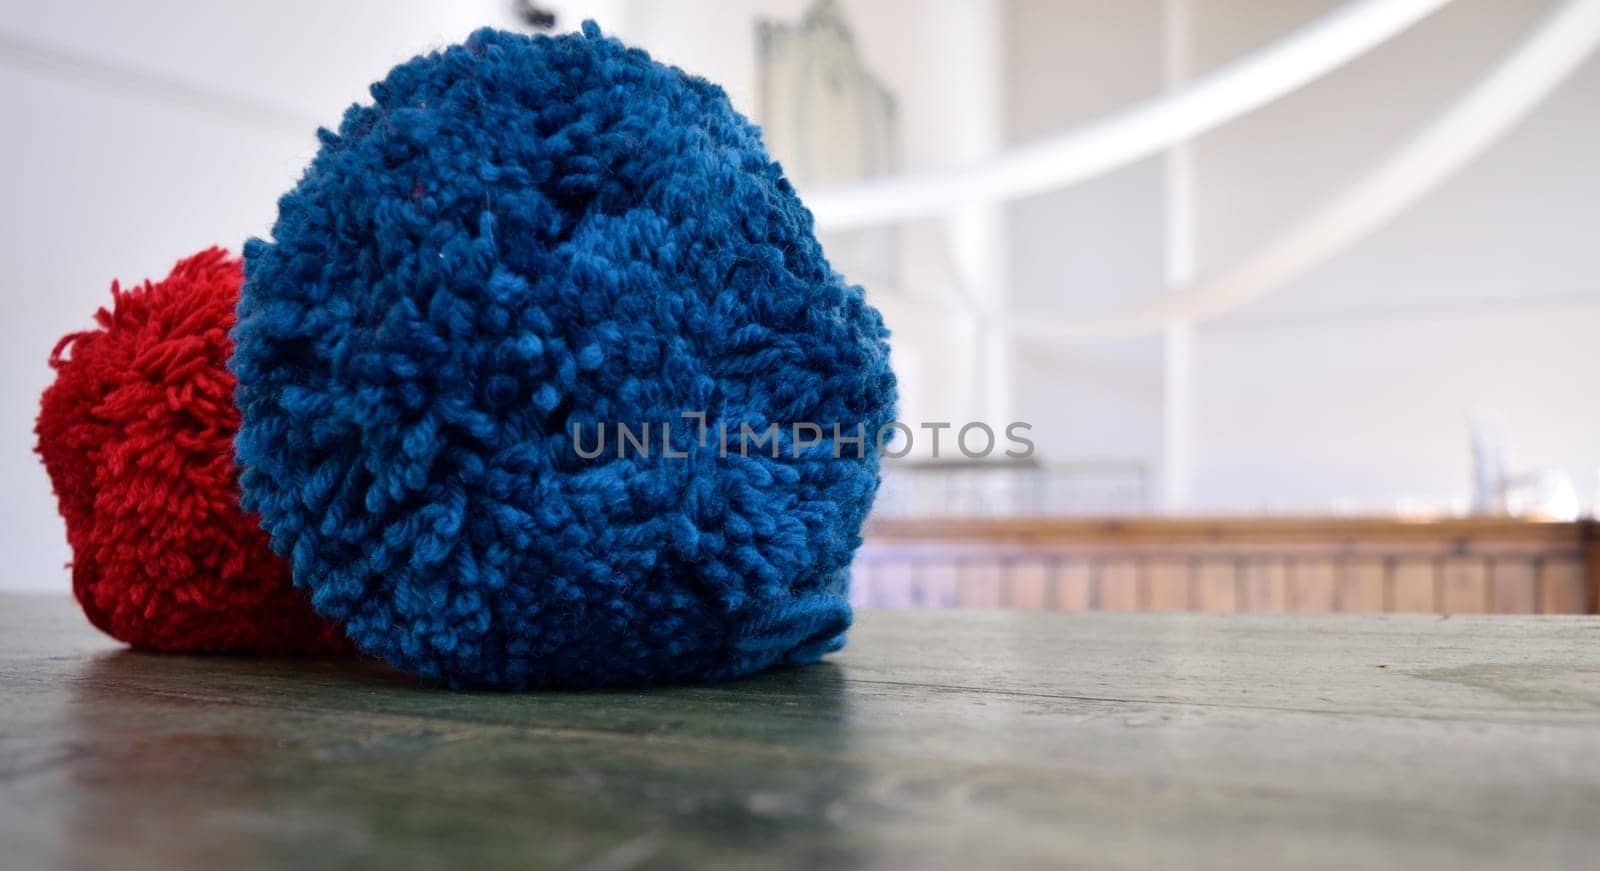 Close-up of a red and blue pom-pom on a wooden surface with a blurred background.